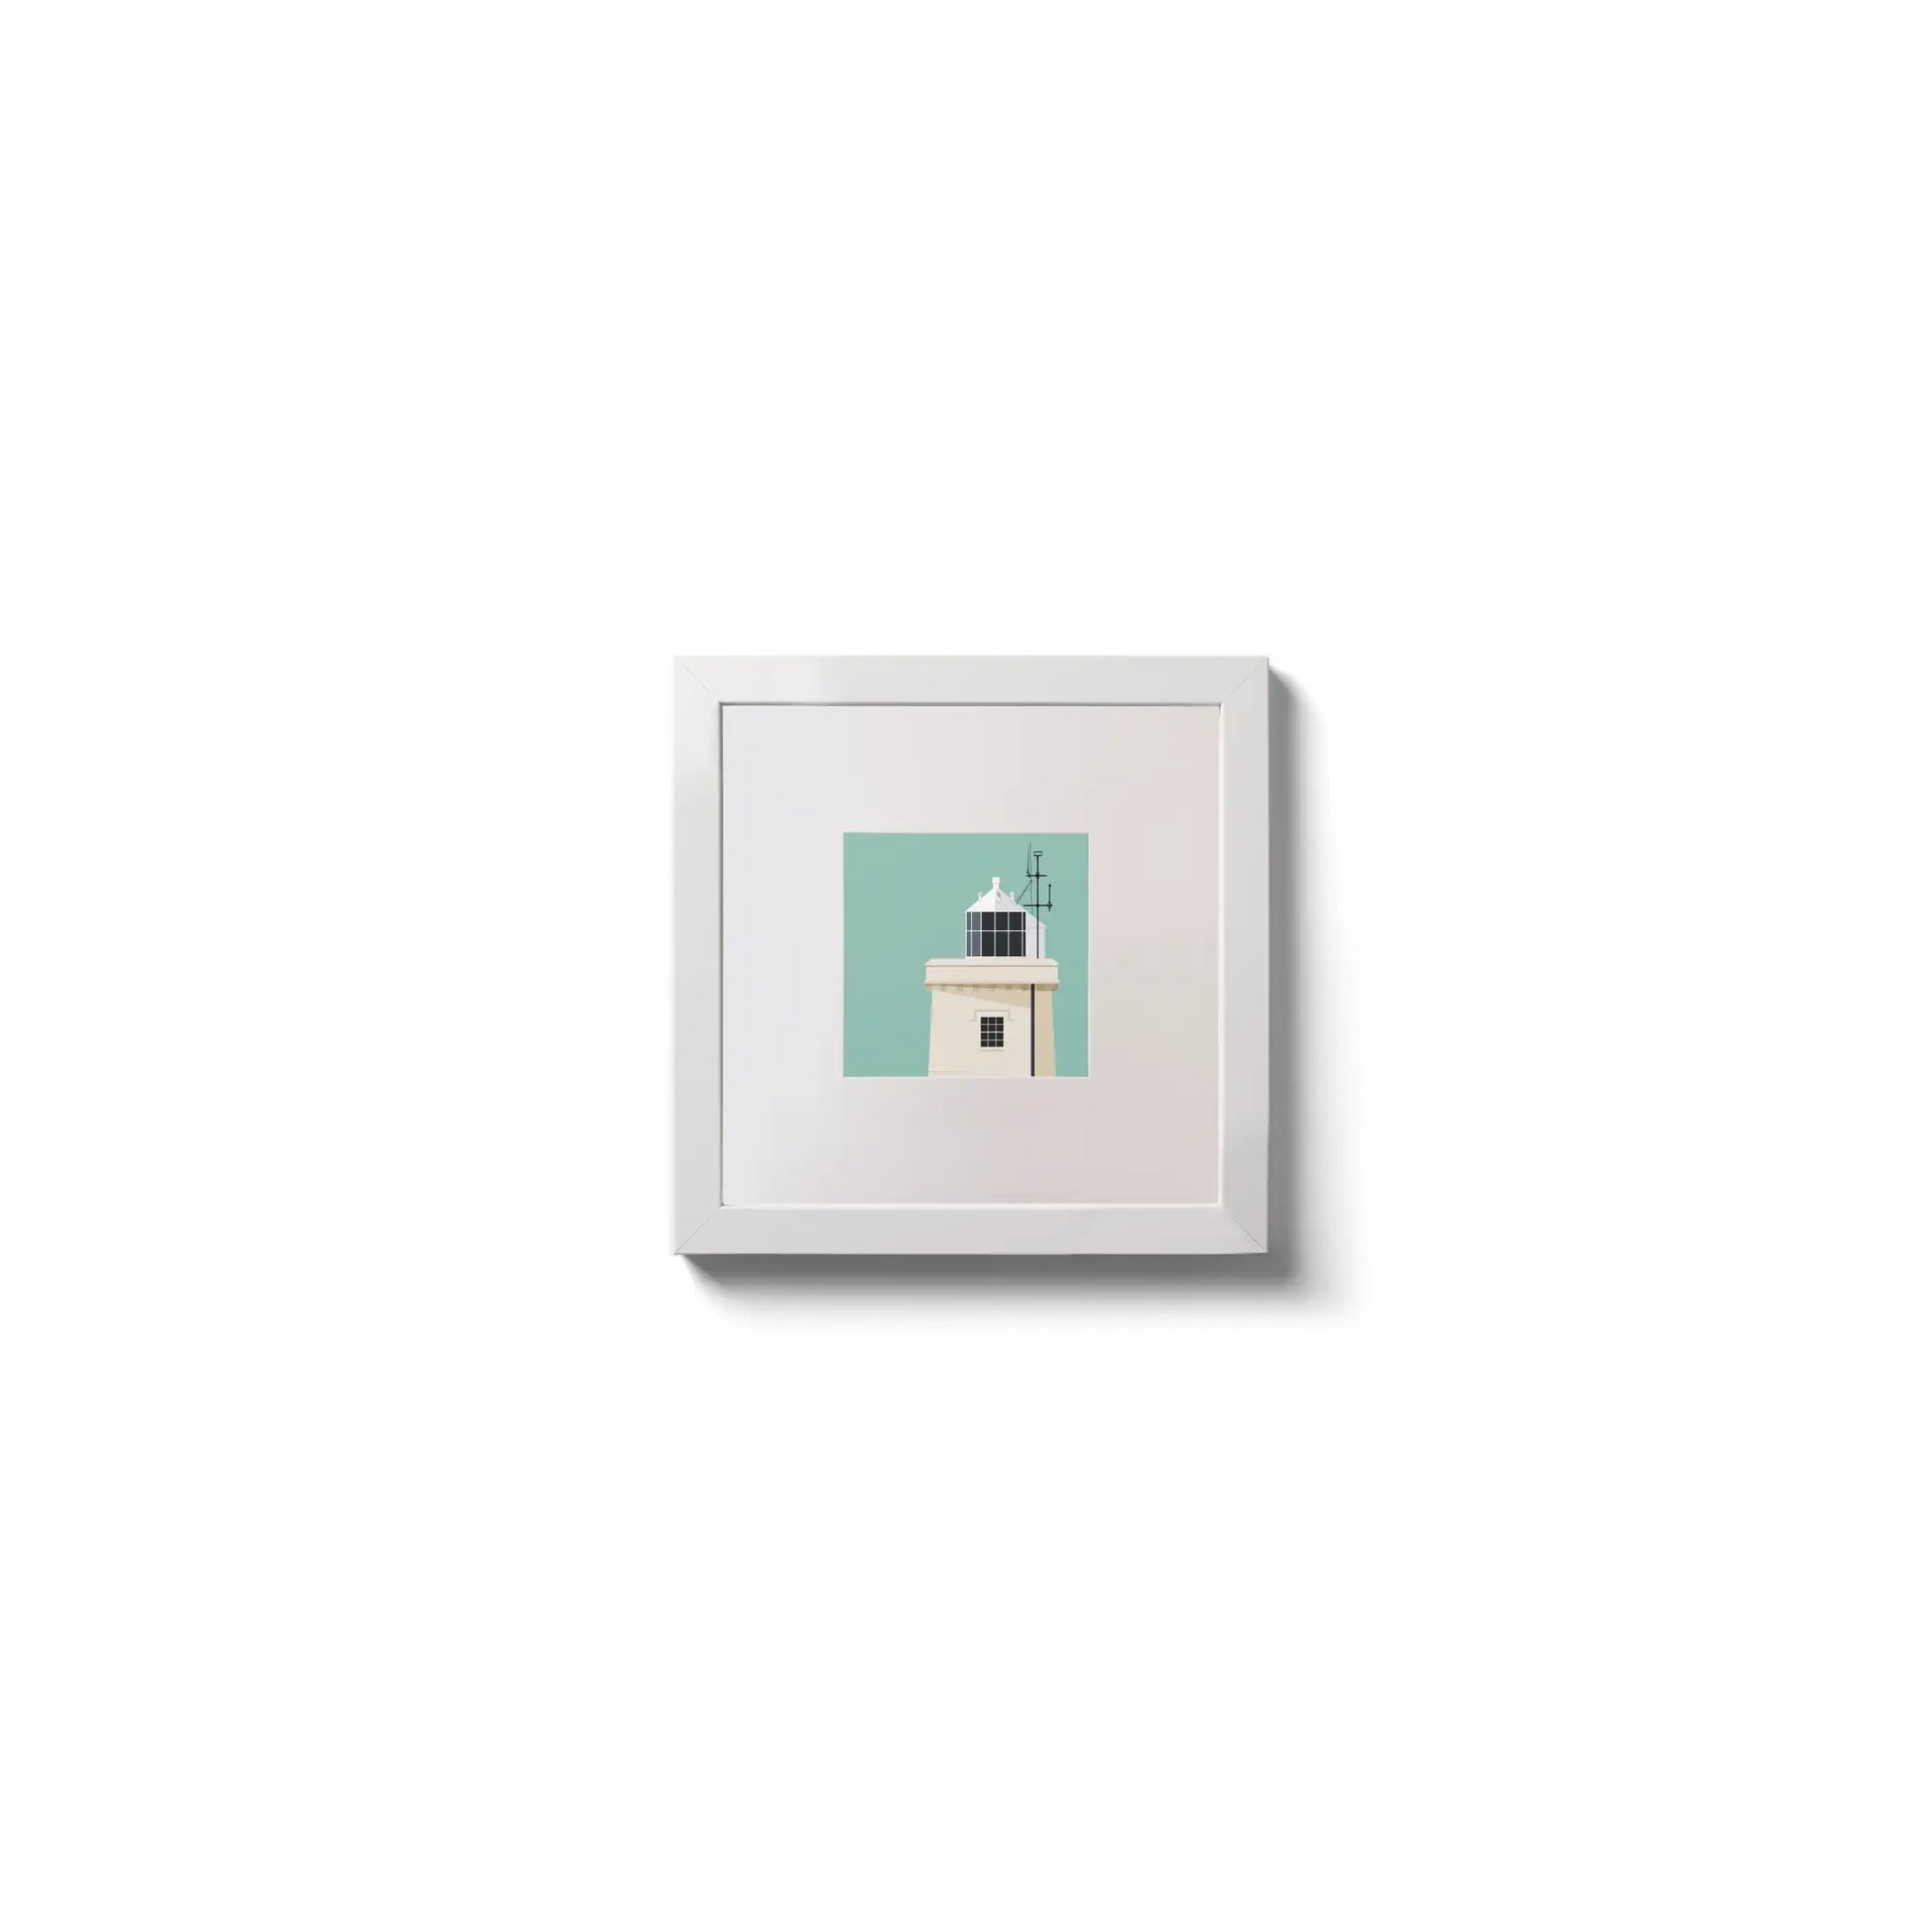 Illustration of Blacksod lighthouse on an ocean green background,  in a white square frame measuring 10x10cm.